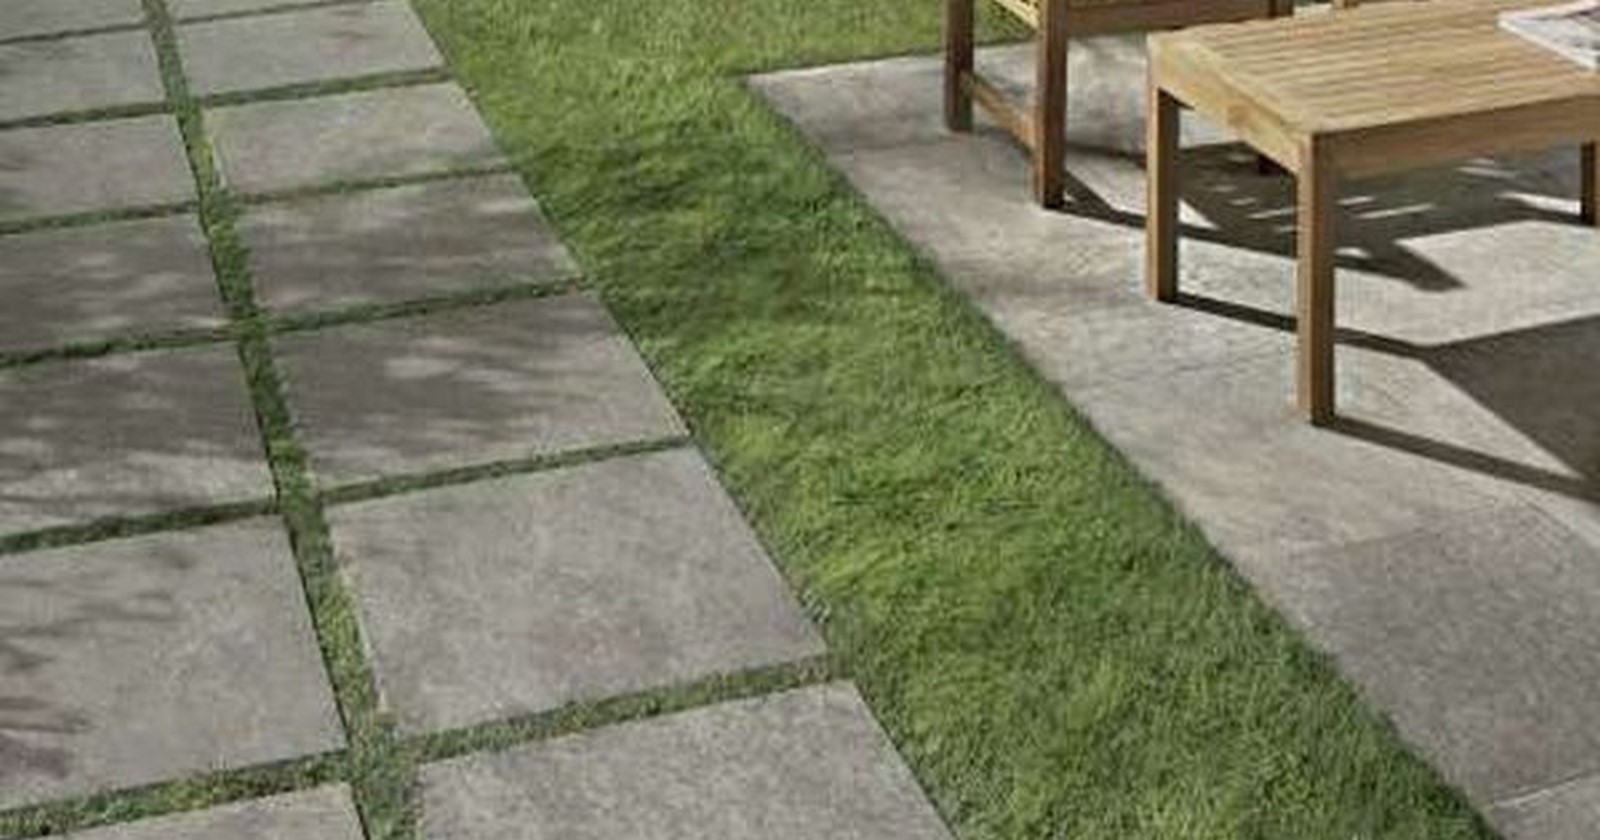 Easy to use porcelain tile -can be laid directly over grass _https://www.indiamart.com/proddetail/porcelain-tiles-22388202973.html?pos=1&amp;kwd=porcelain%20tile&amp;tags=A||||7440.6797|Price|product